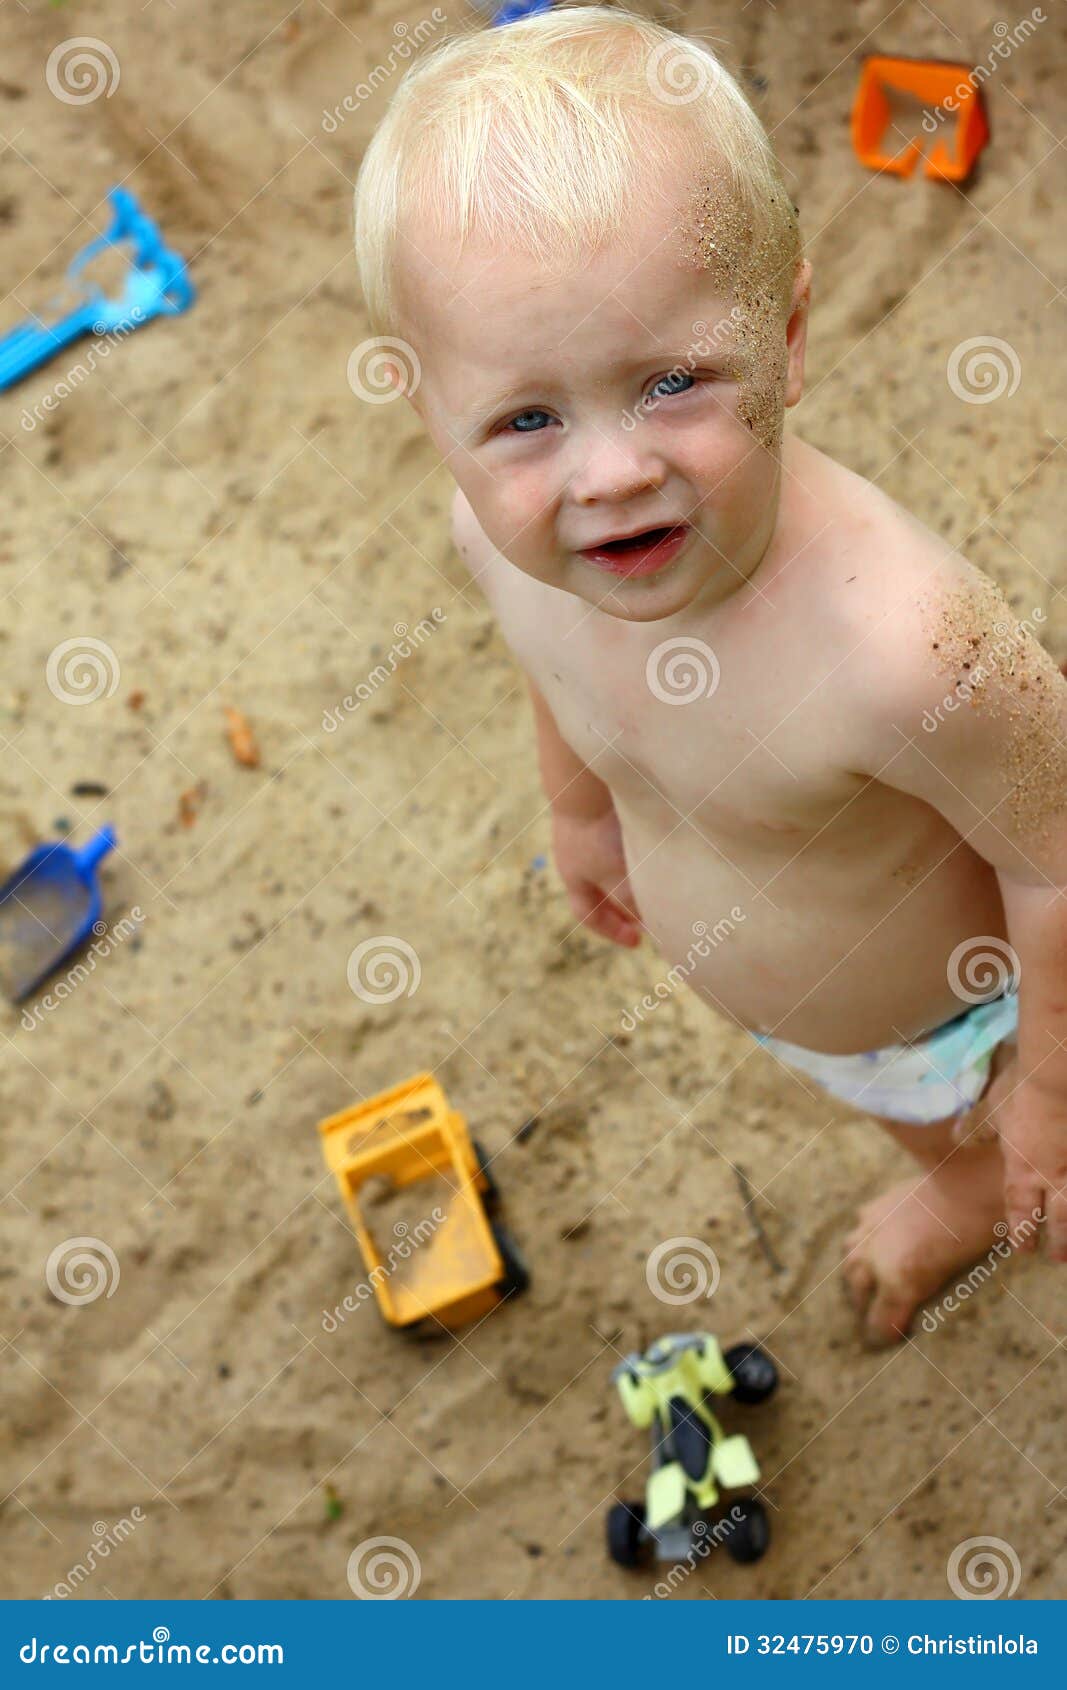 cute baby playing sand boy standing outside sandbox sunny summer day toys 32475970